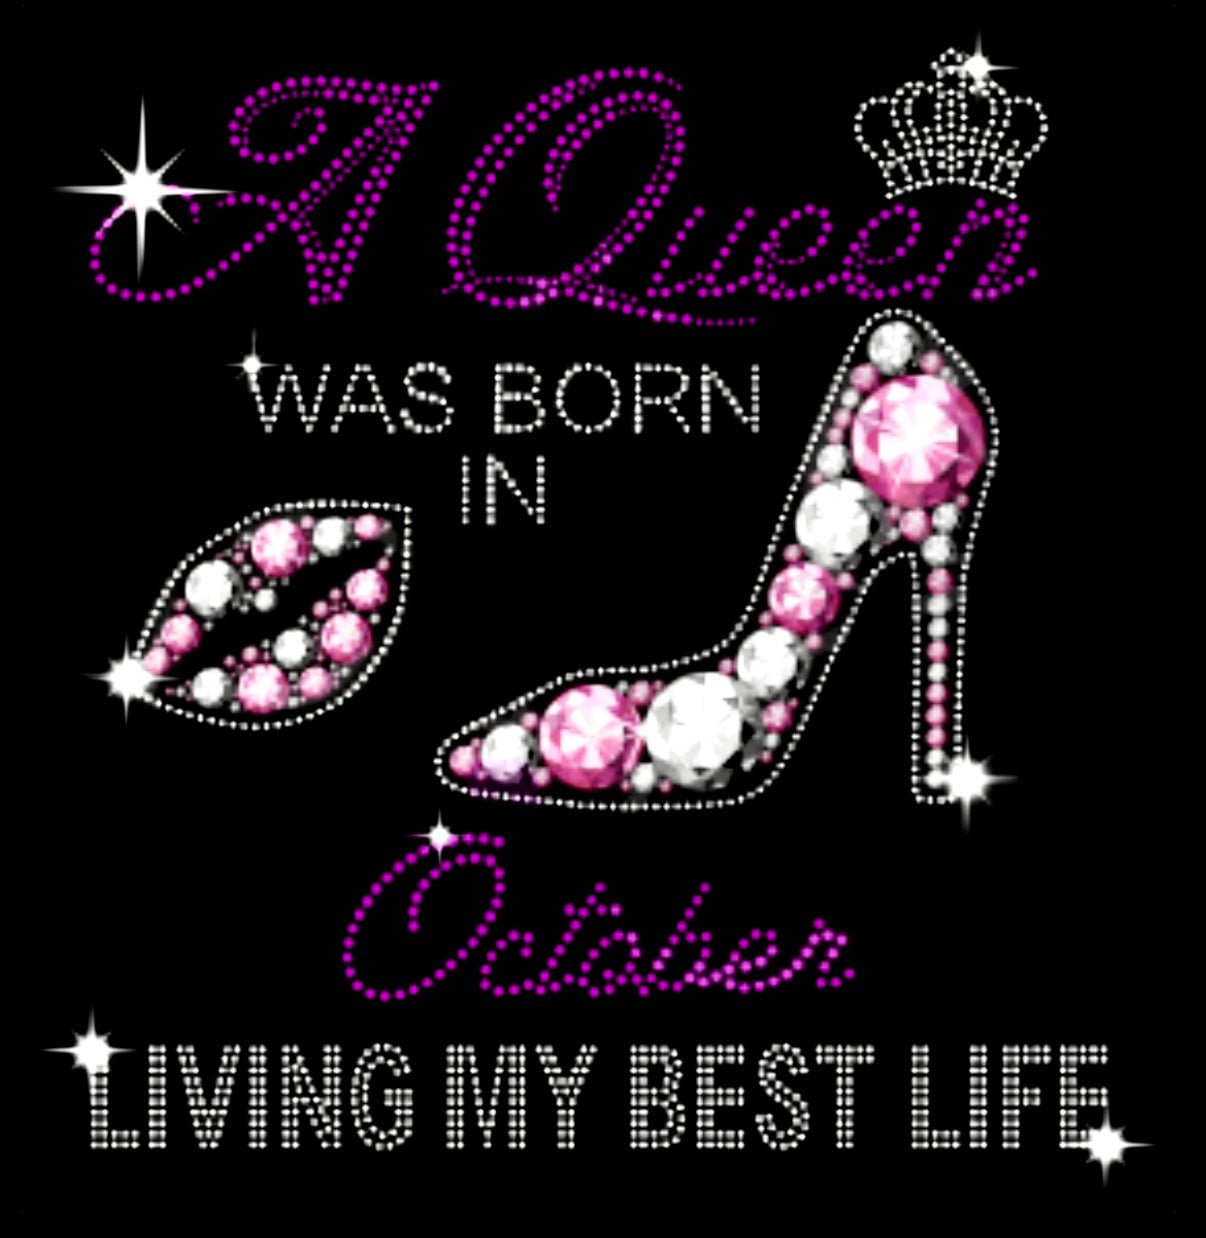 A Queen was born in Tee - Shimmer Me